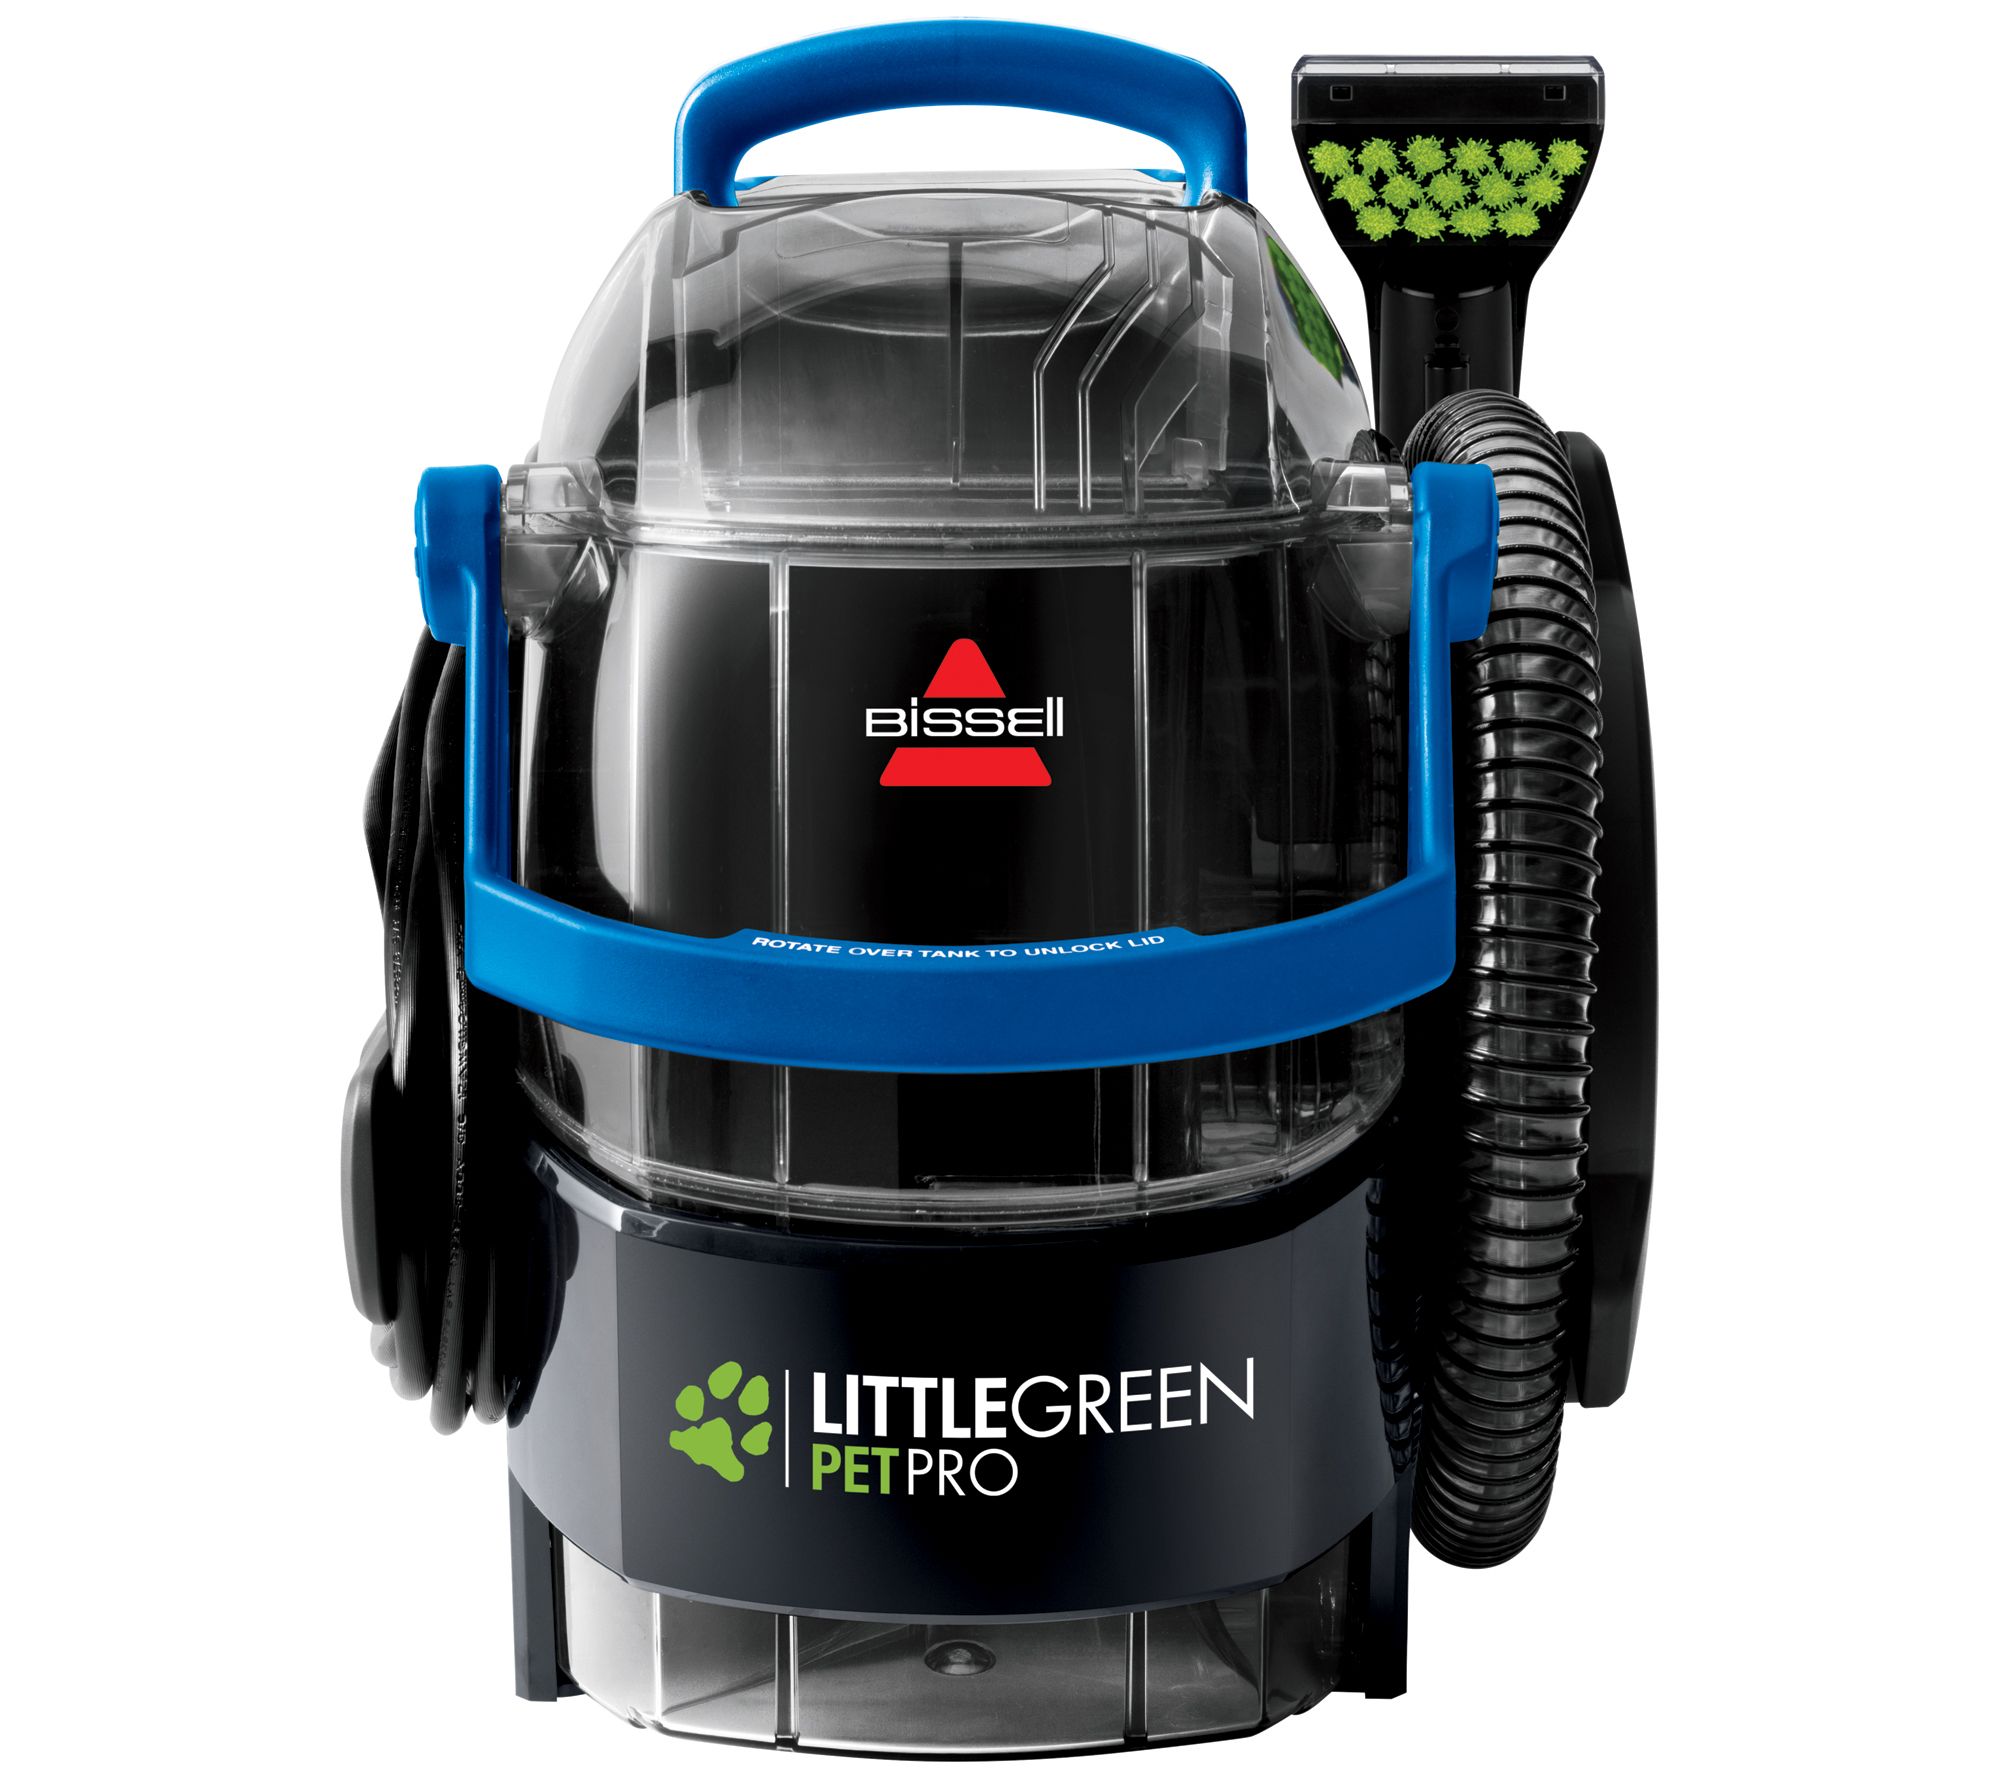  Bissell Little Green Full-Size Floor Cleaning Appliances